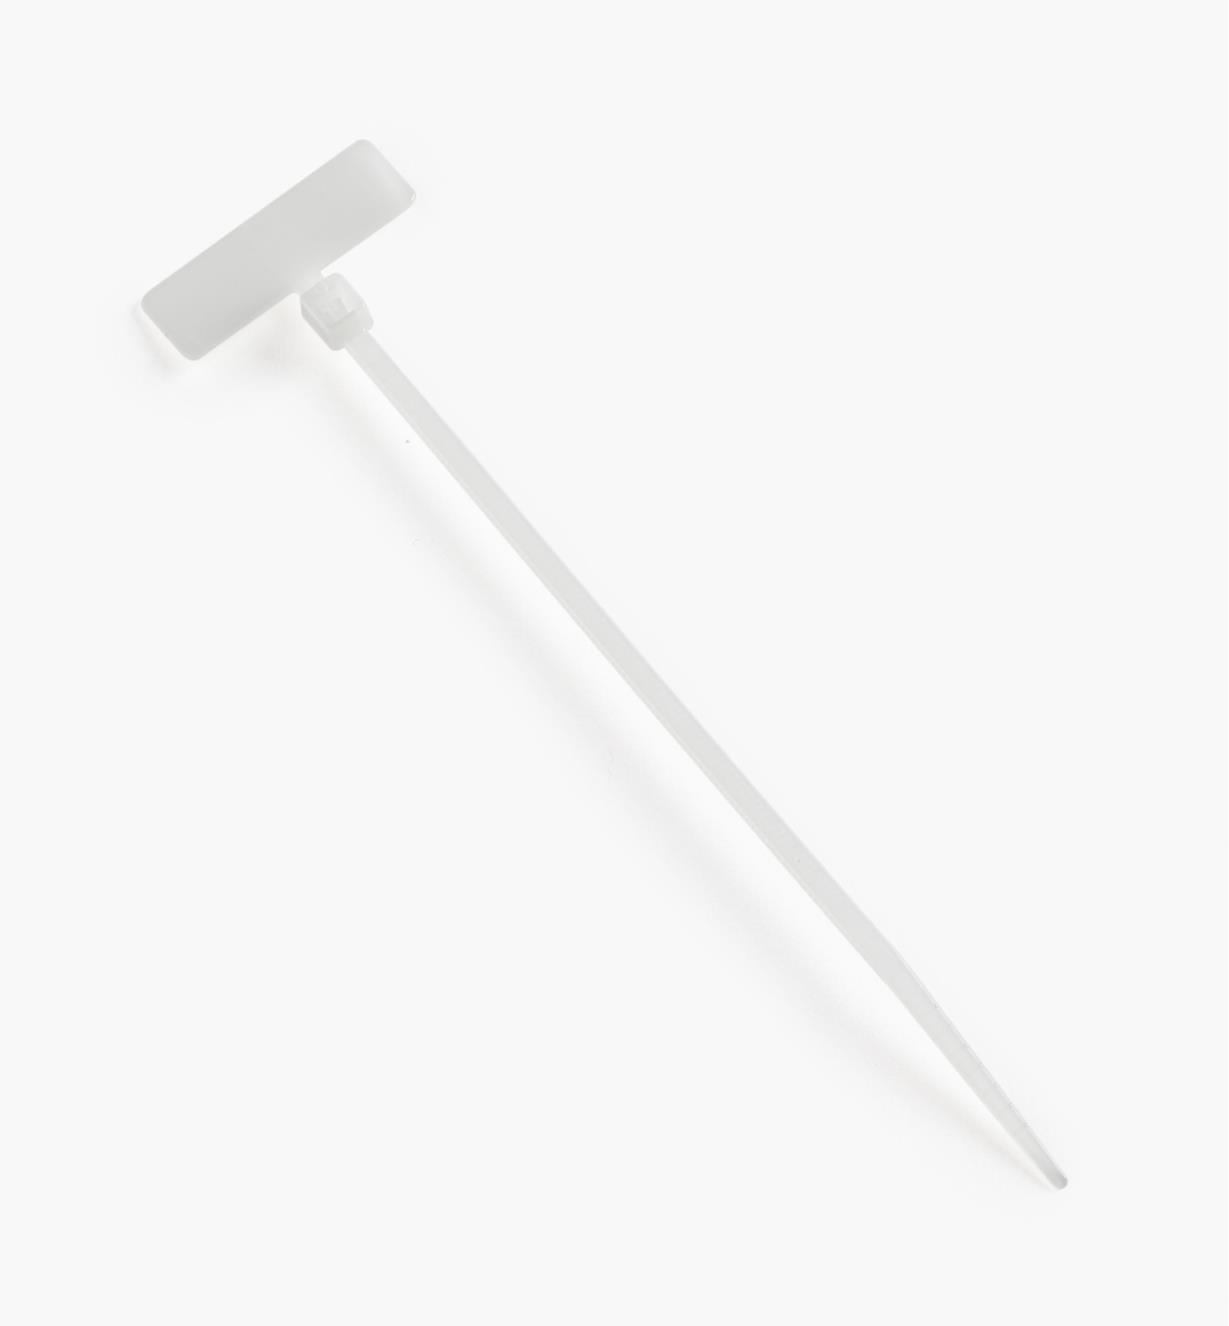 03K7311 - 4 5/16" Label Cable Ties, pkg. of 100